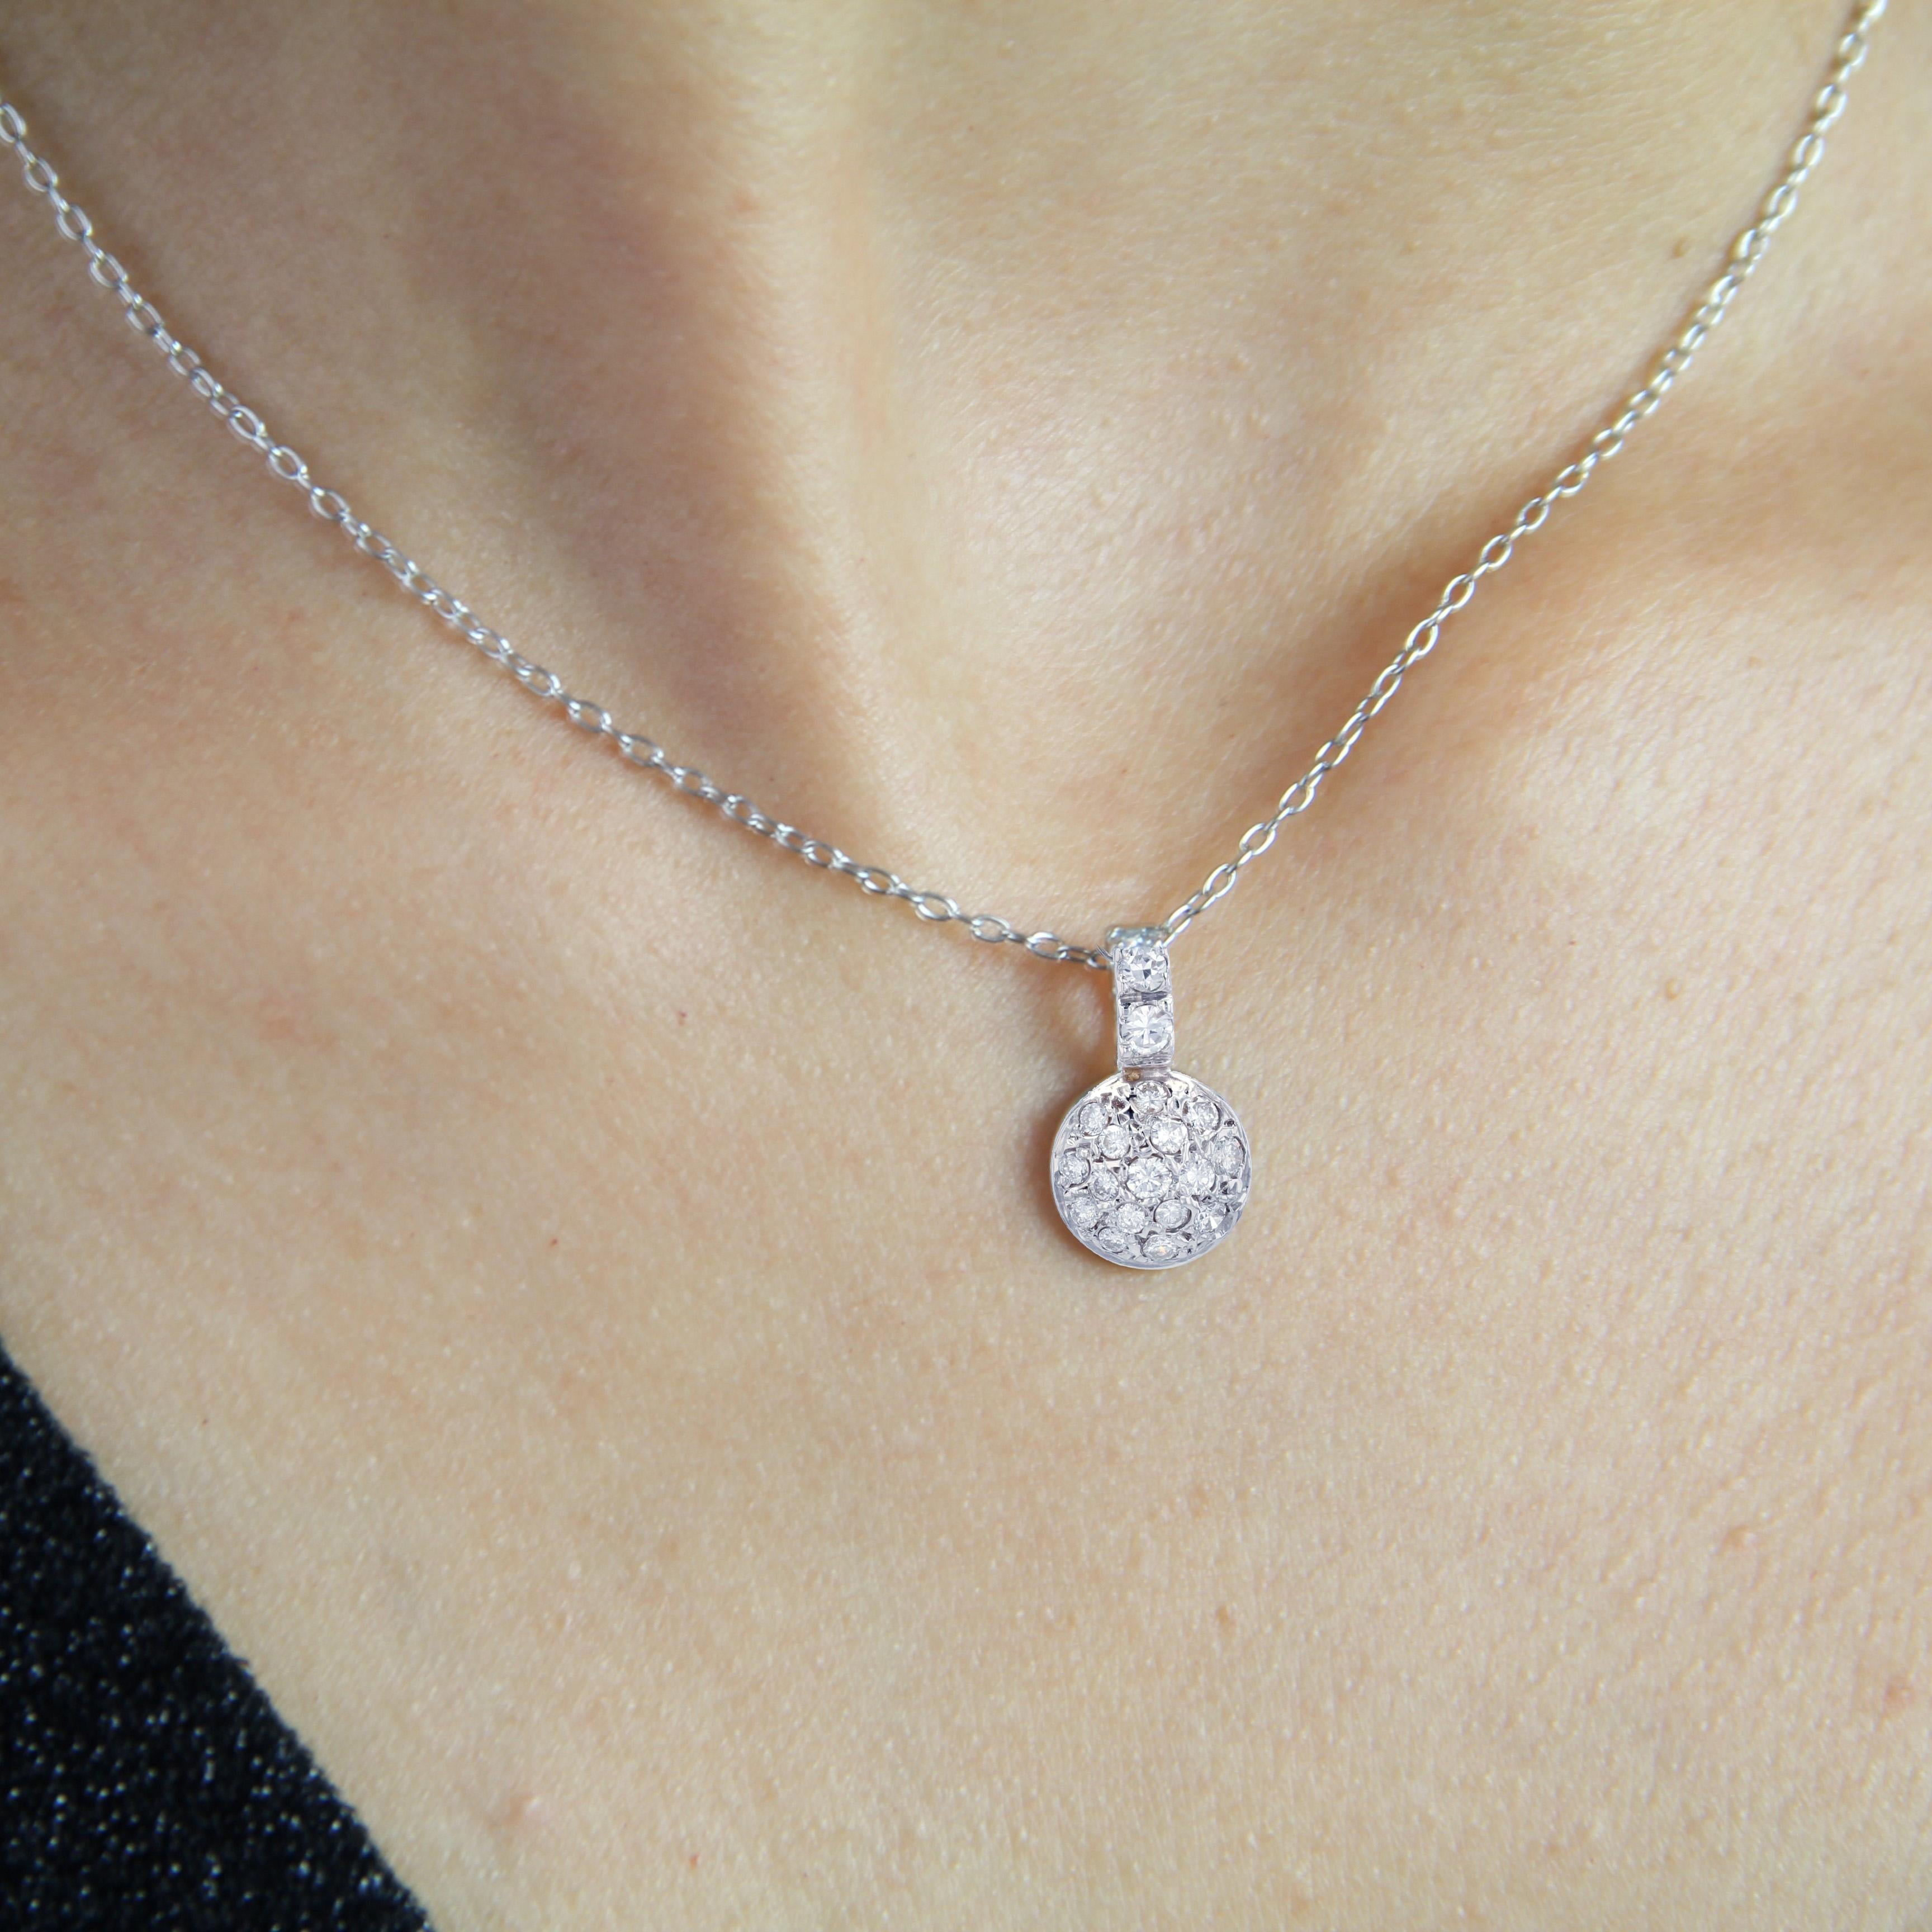 French, 1970s Diamonds 18 Karat White Gold Pendant and Chain For Sale 5